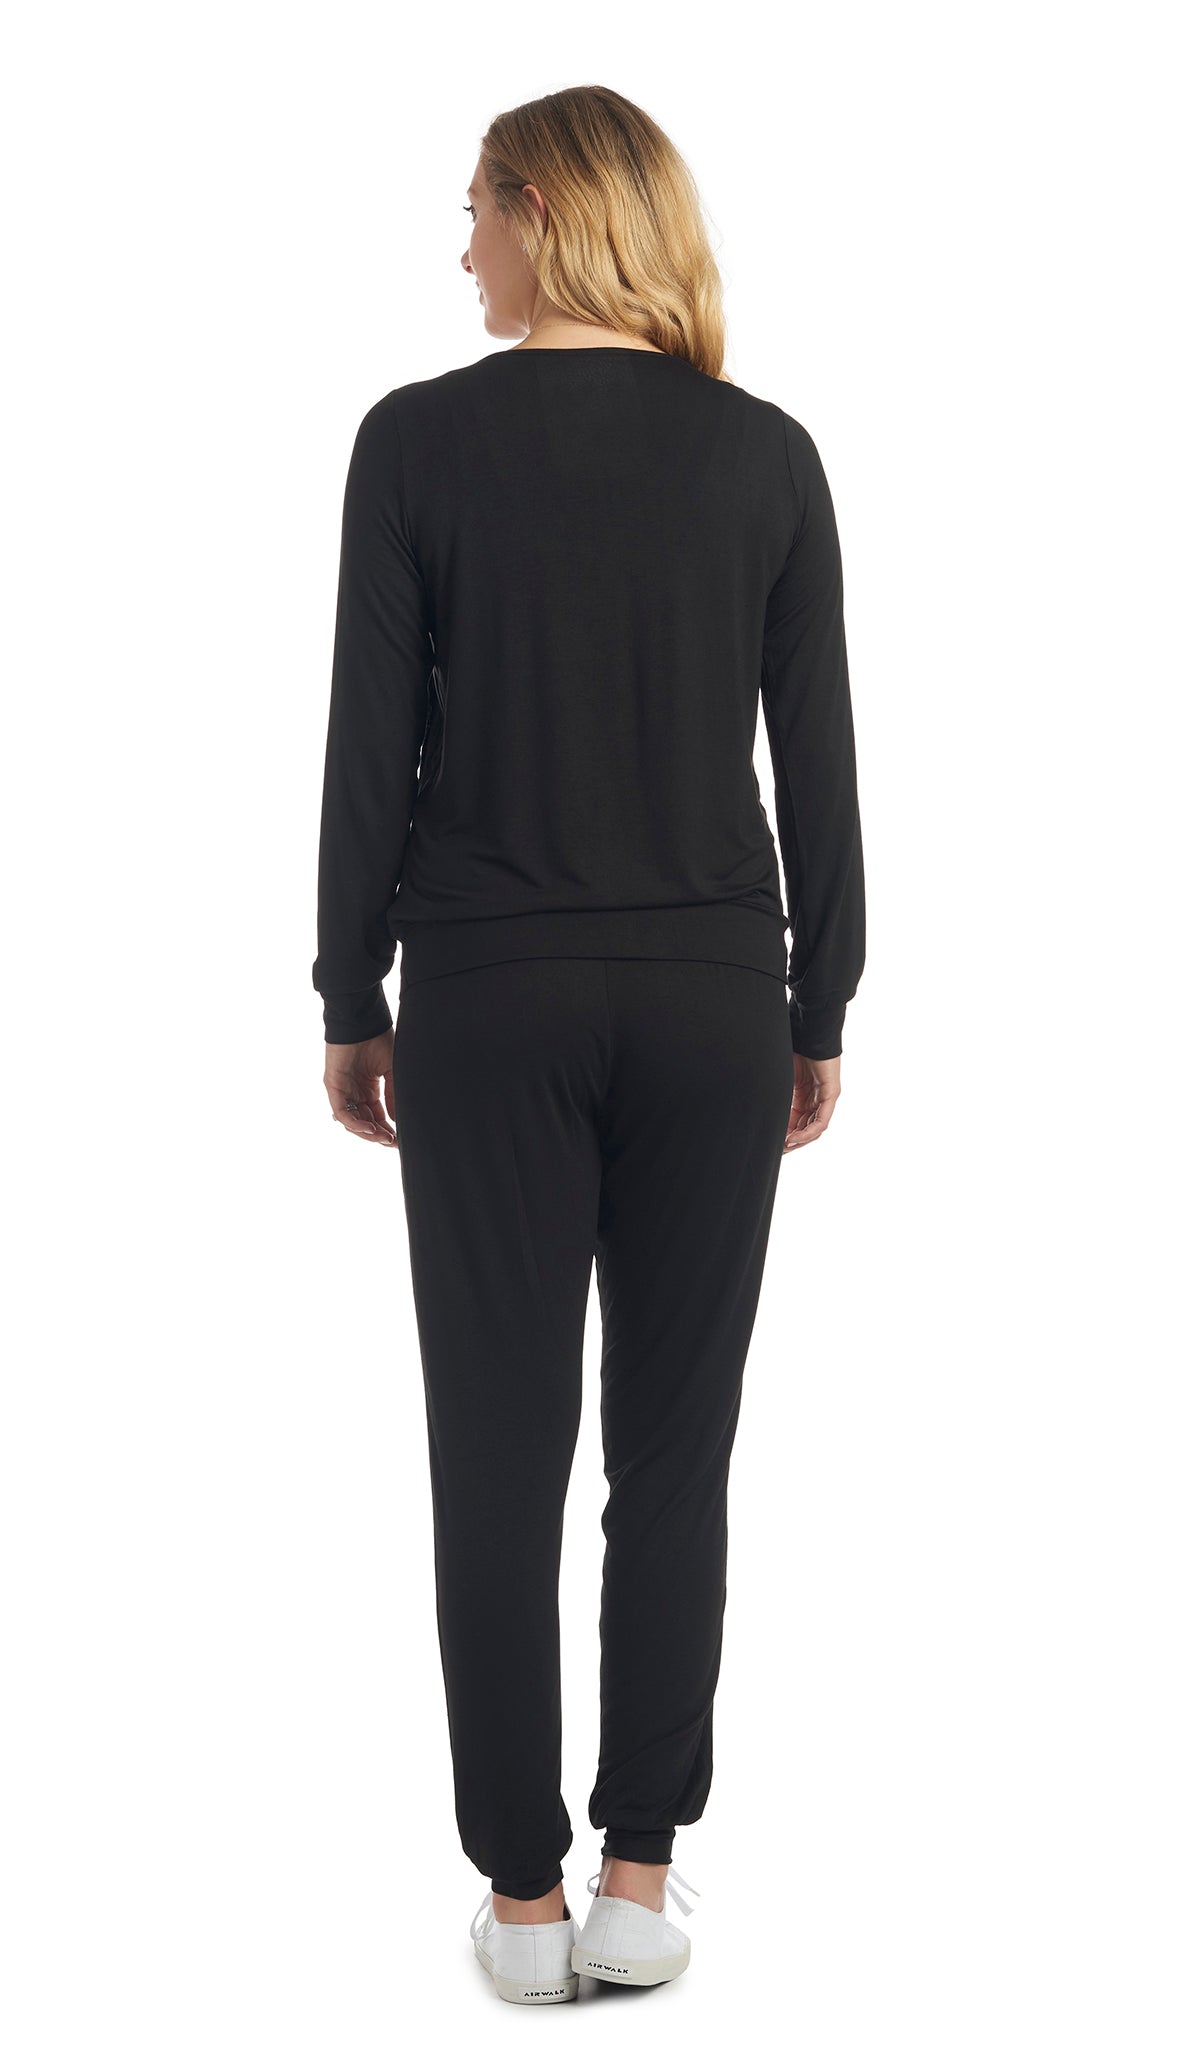 Black Whitney 2-Piece back view on figure showing long sleeve top and long pant with cuff hem.